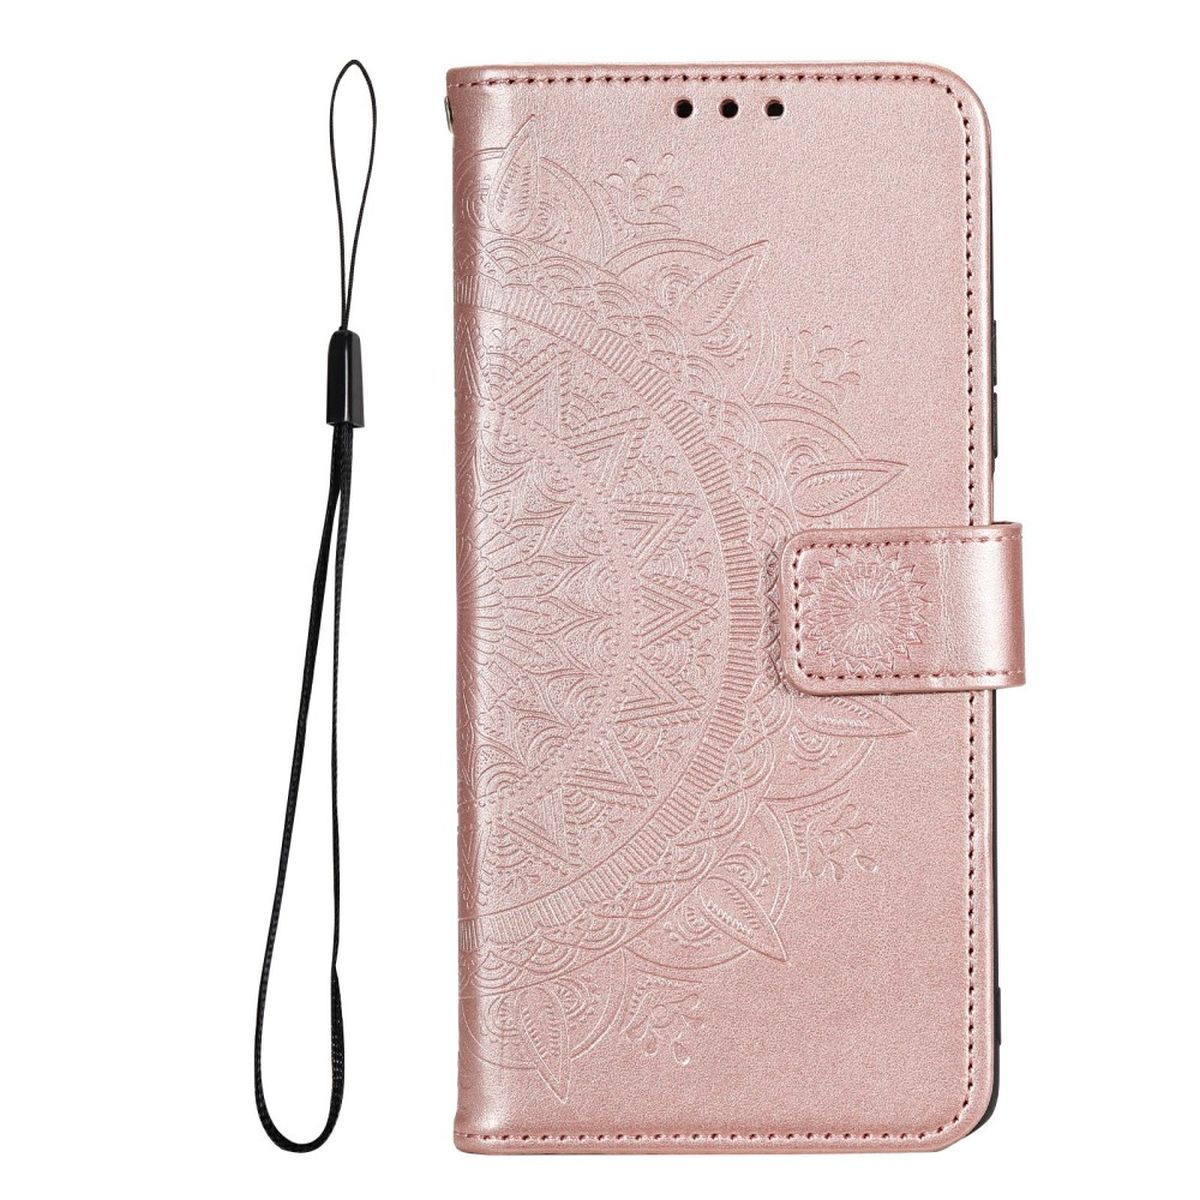 COVERKINGZ Klapphülle mit Mandala Muster, Samsung, Galaxy Rosegold Bookcover, A03